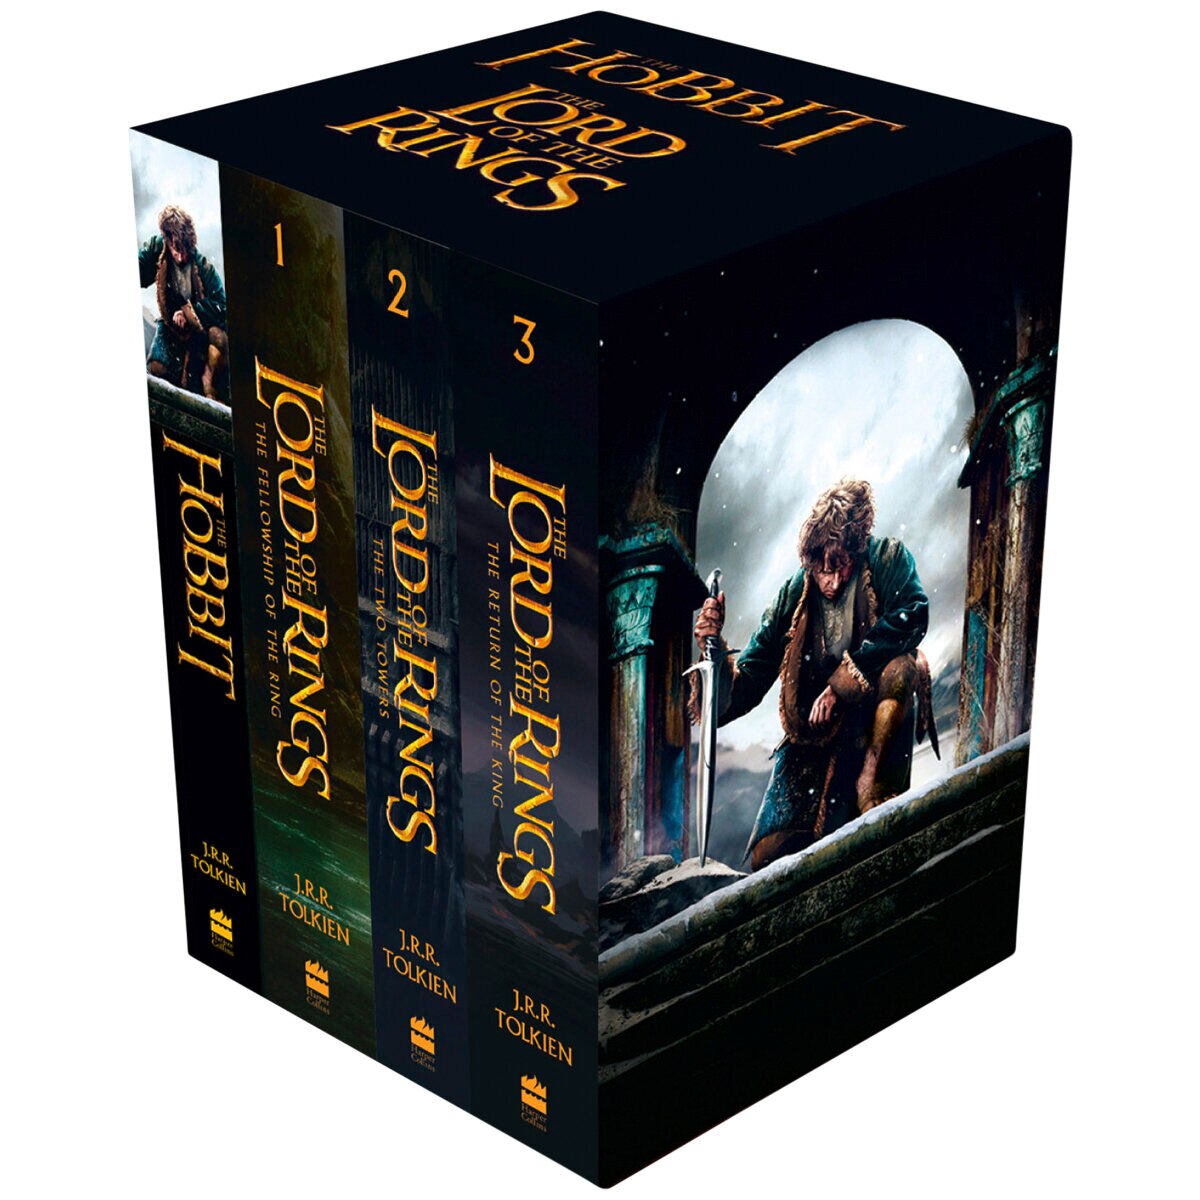 Hobbit & Lord of the Rings Box Set